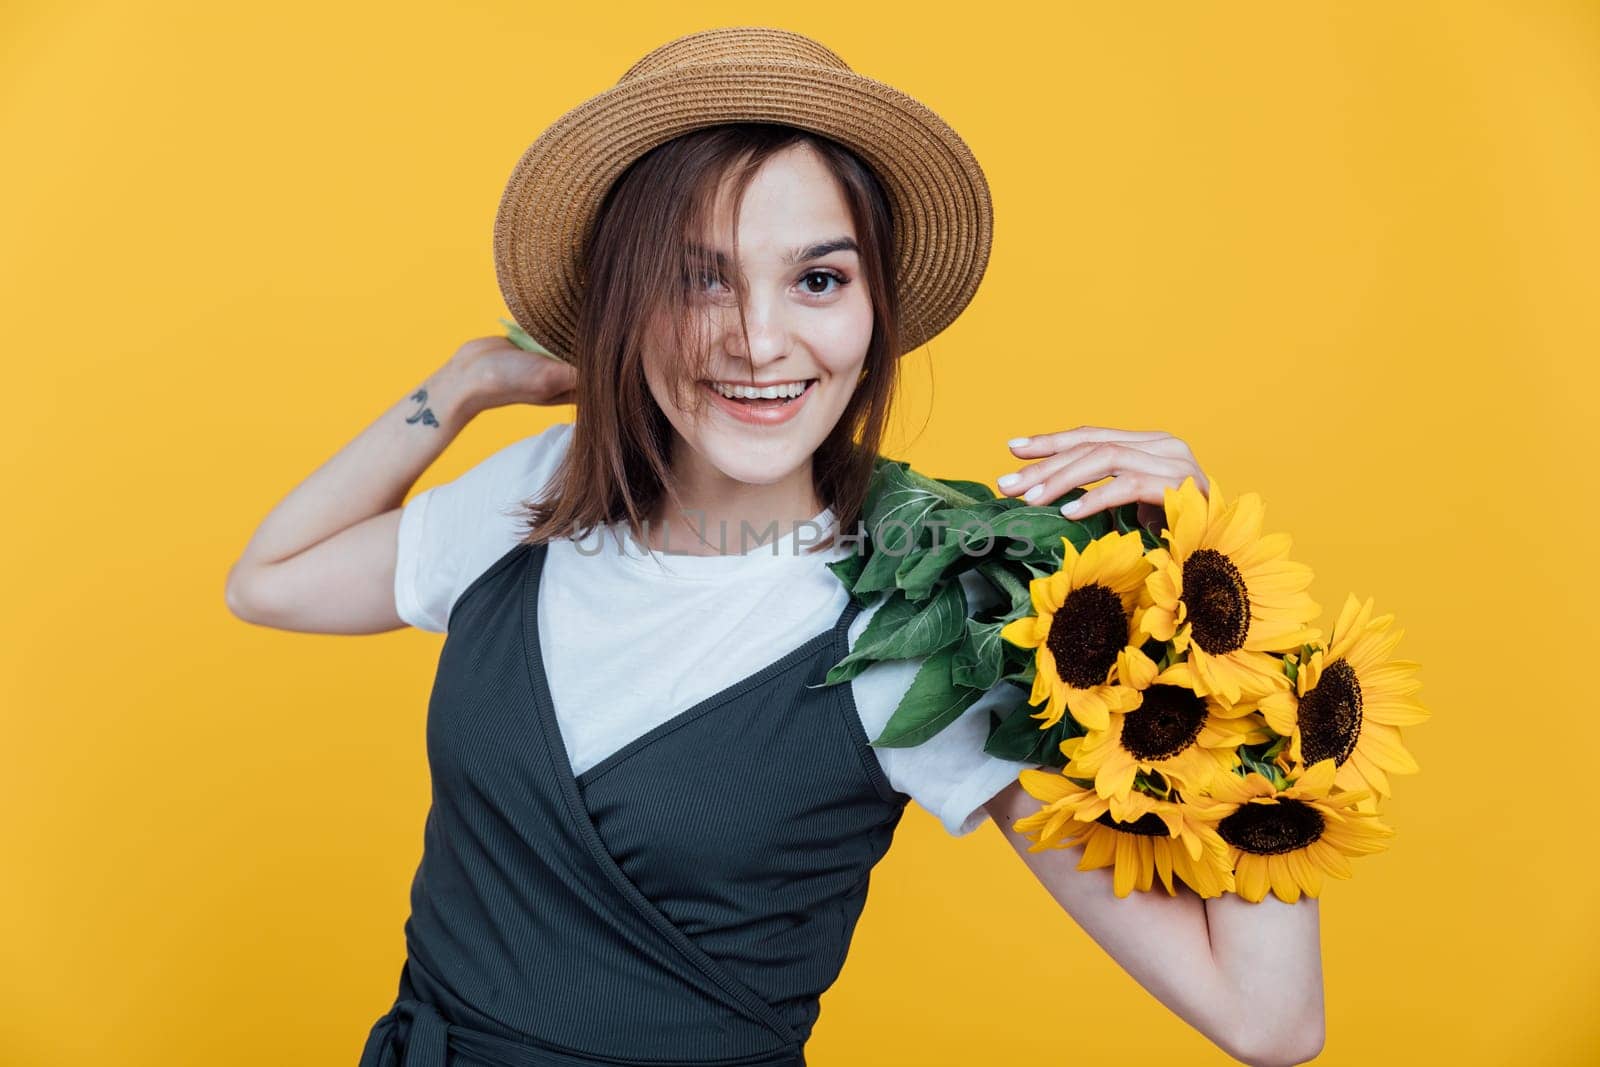 Portrait of a beautiful young woman with sunflower flowers on a yellow background by Simakov